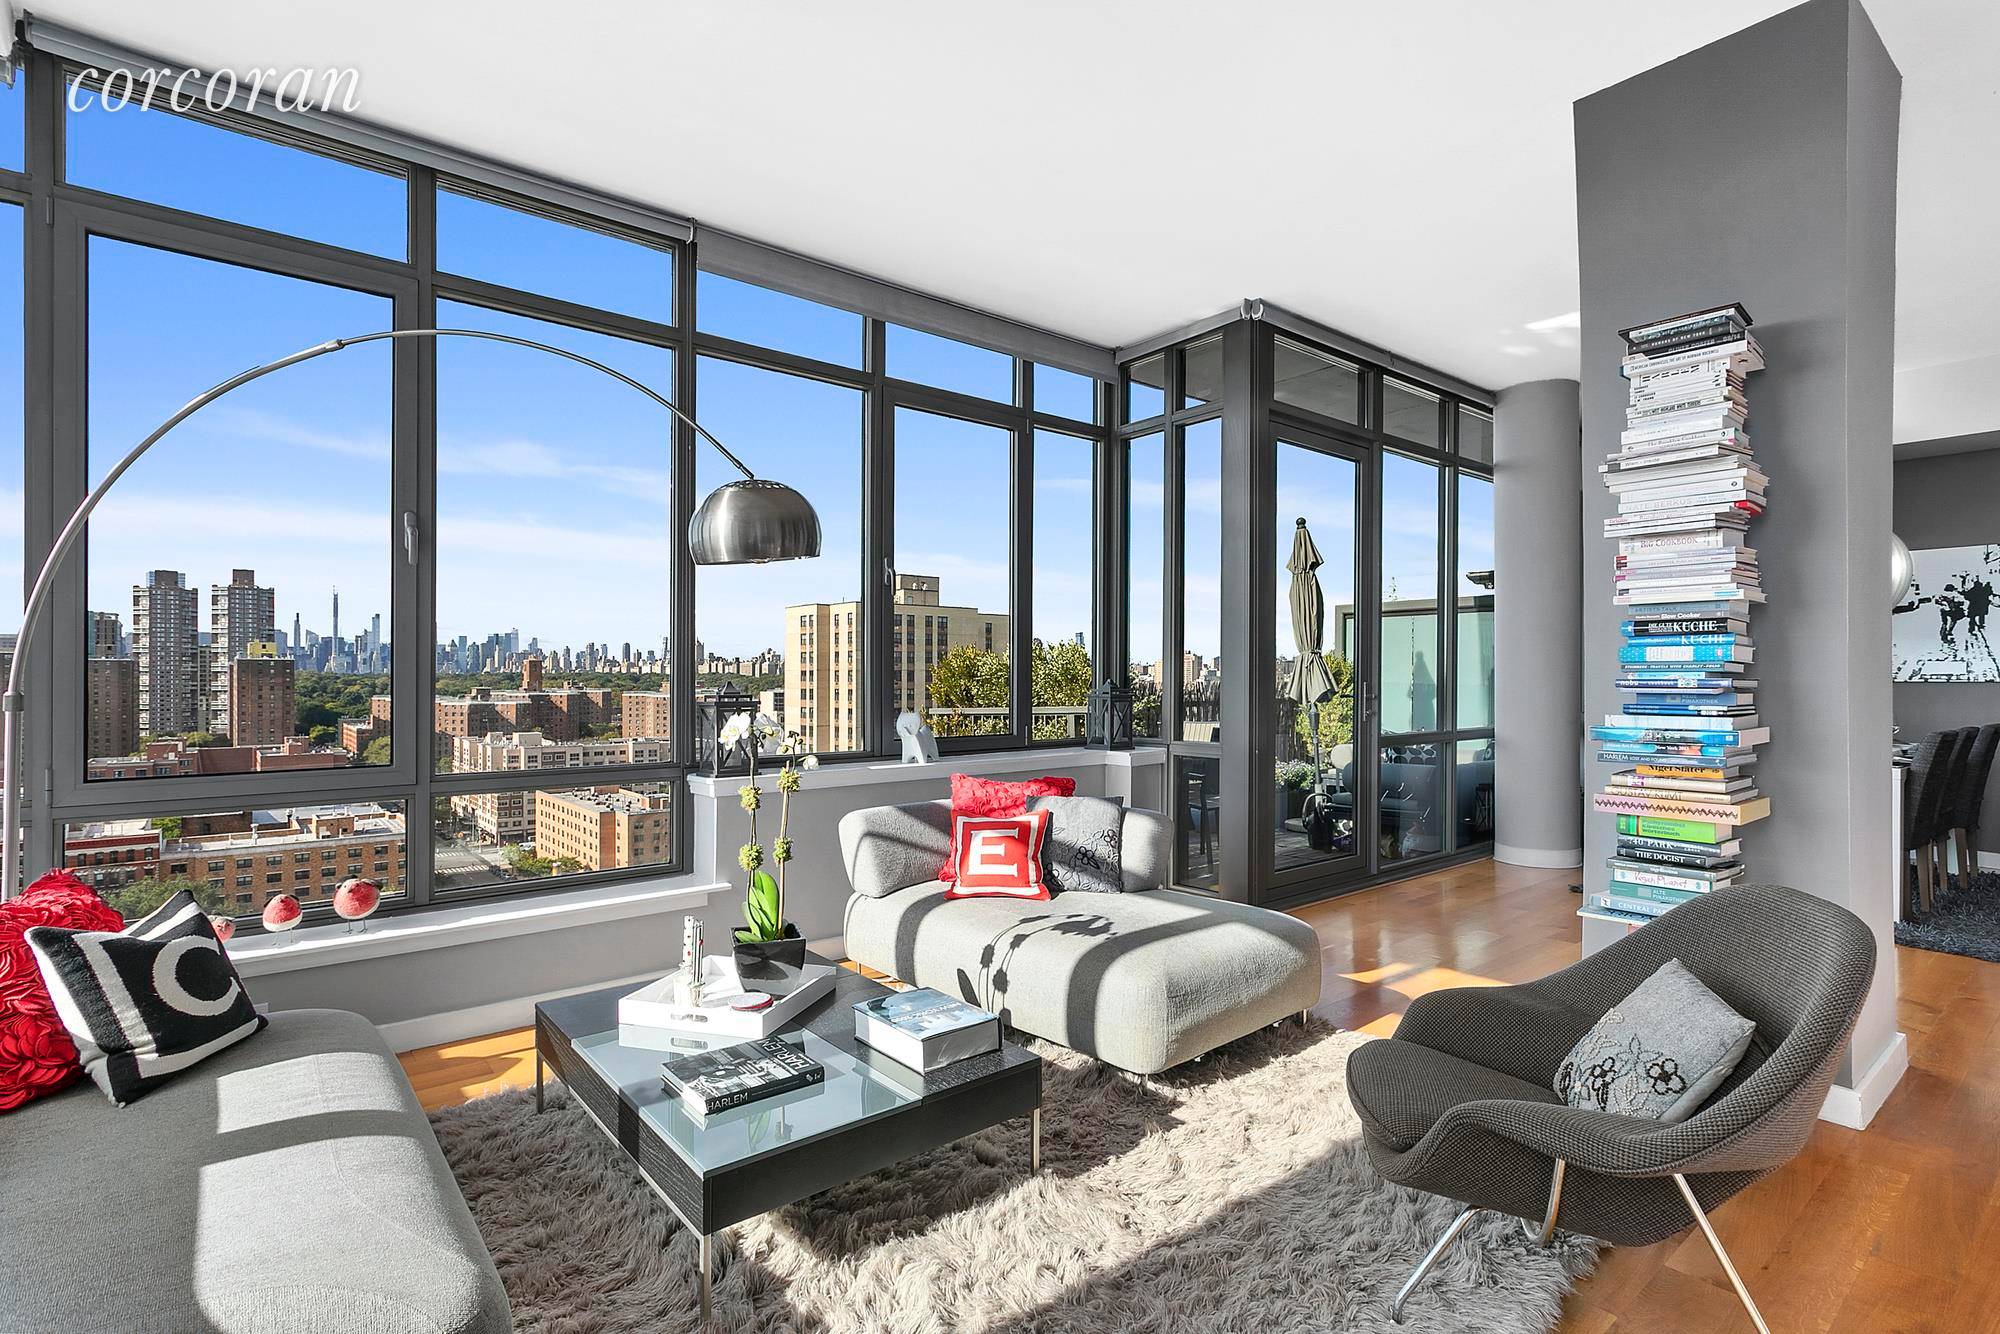 Perched on the fifteenth floor of A 5th on the ParkA, this sun flooded residence offers sweeping Park and city views to the South and East.